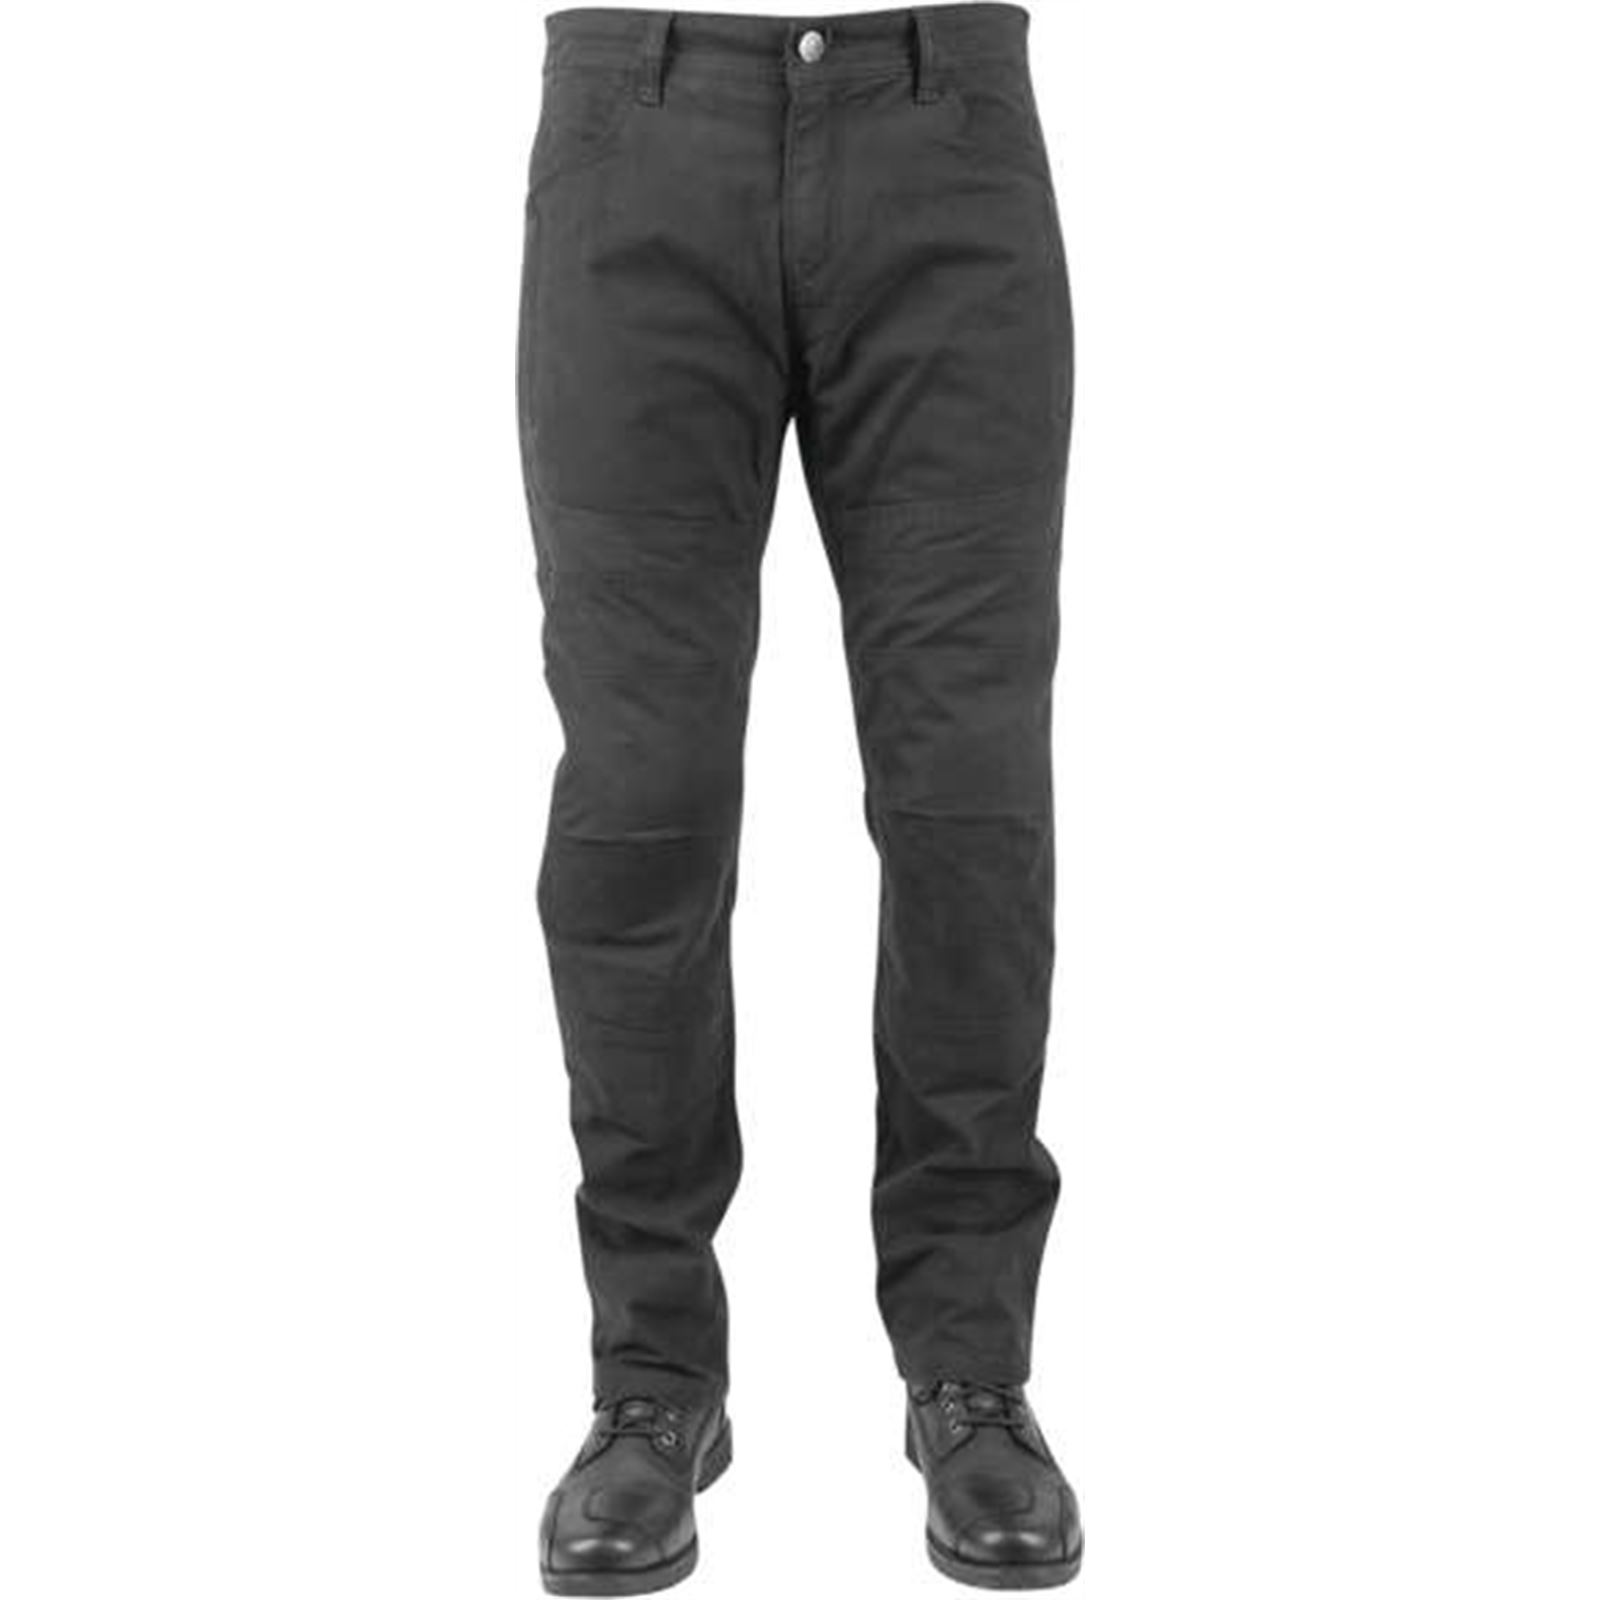 Speed And Strength Men's Dogs of War 2.0 Pants - Black - 36x32